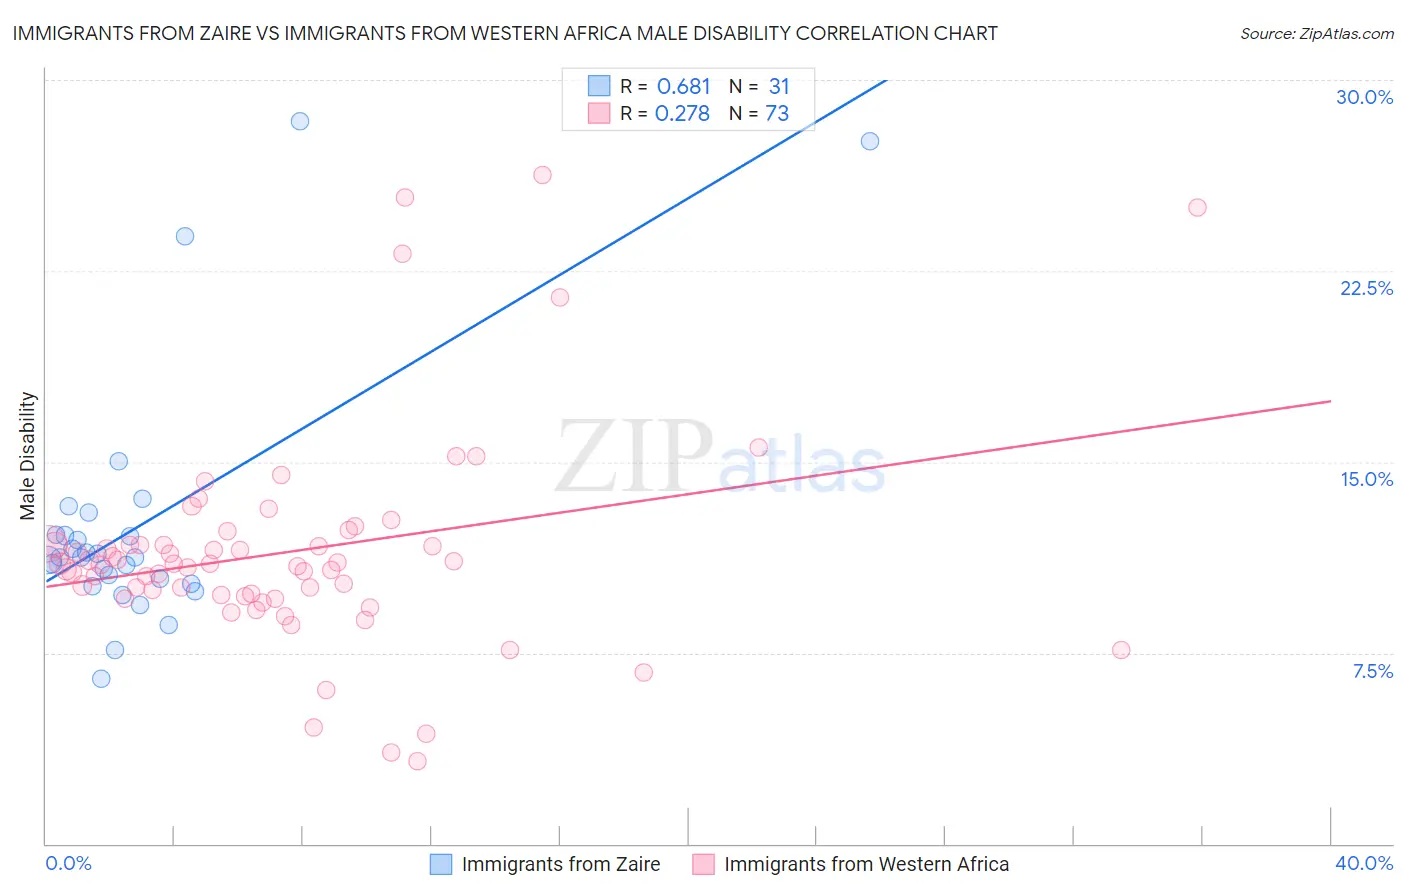 Immigrants from Zaire vs Immigrants from Western Africa Male Disability